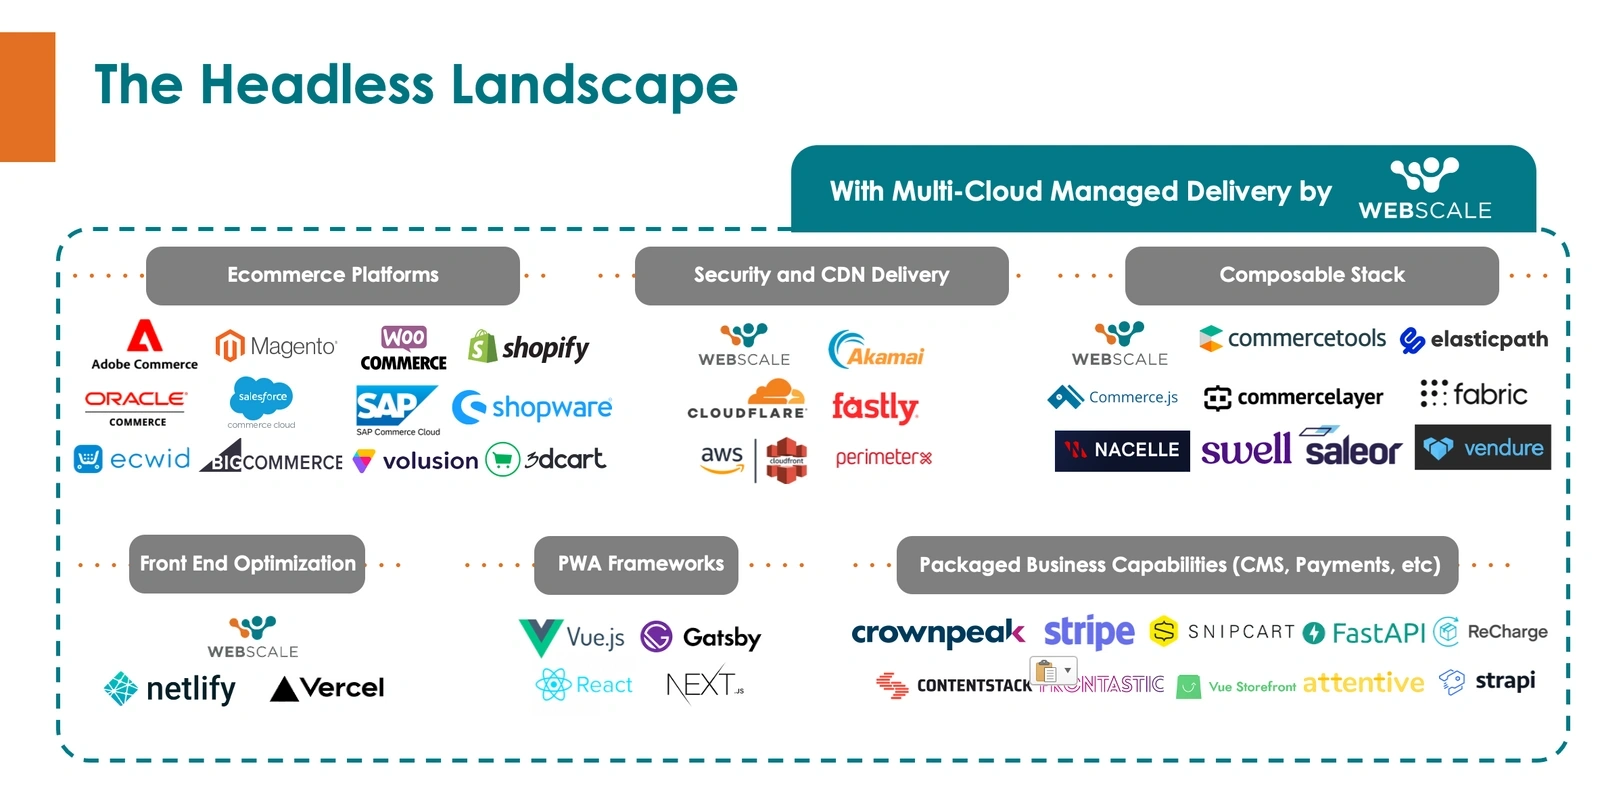 The headless landscape – examples of vendors with multi-cloud managed delivery powered by Webscale